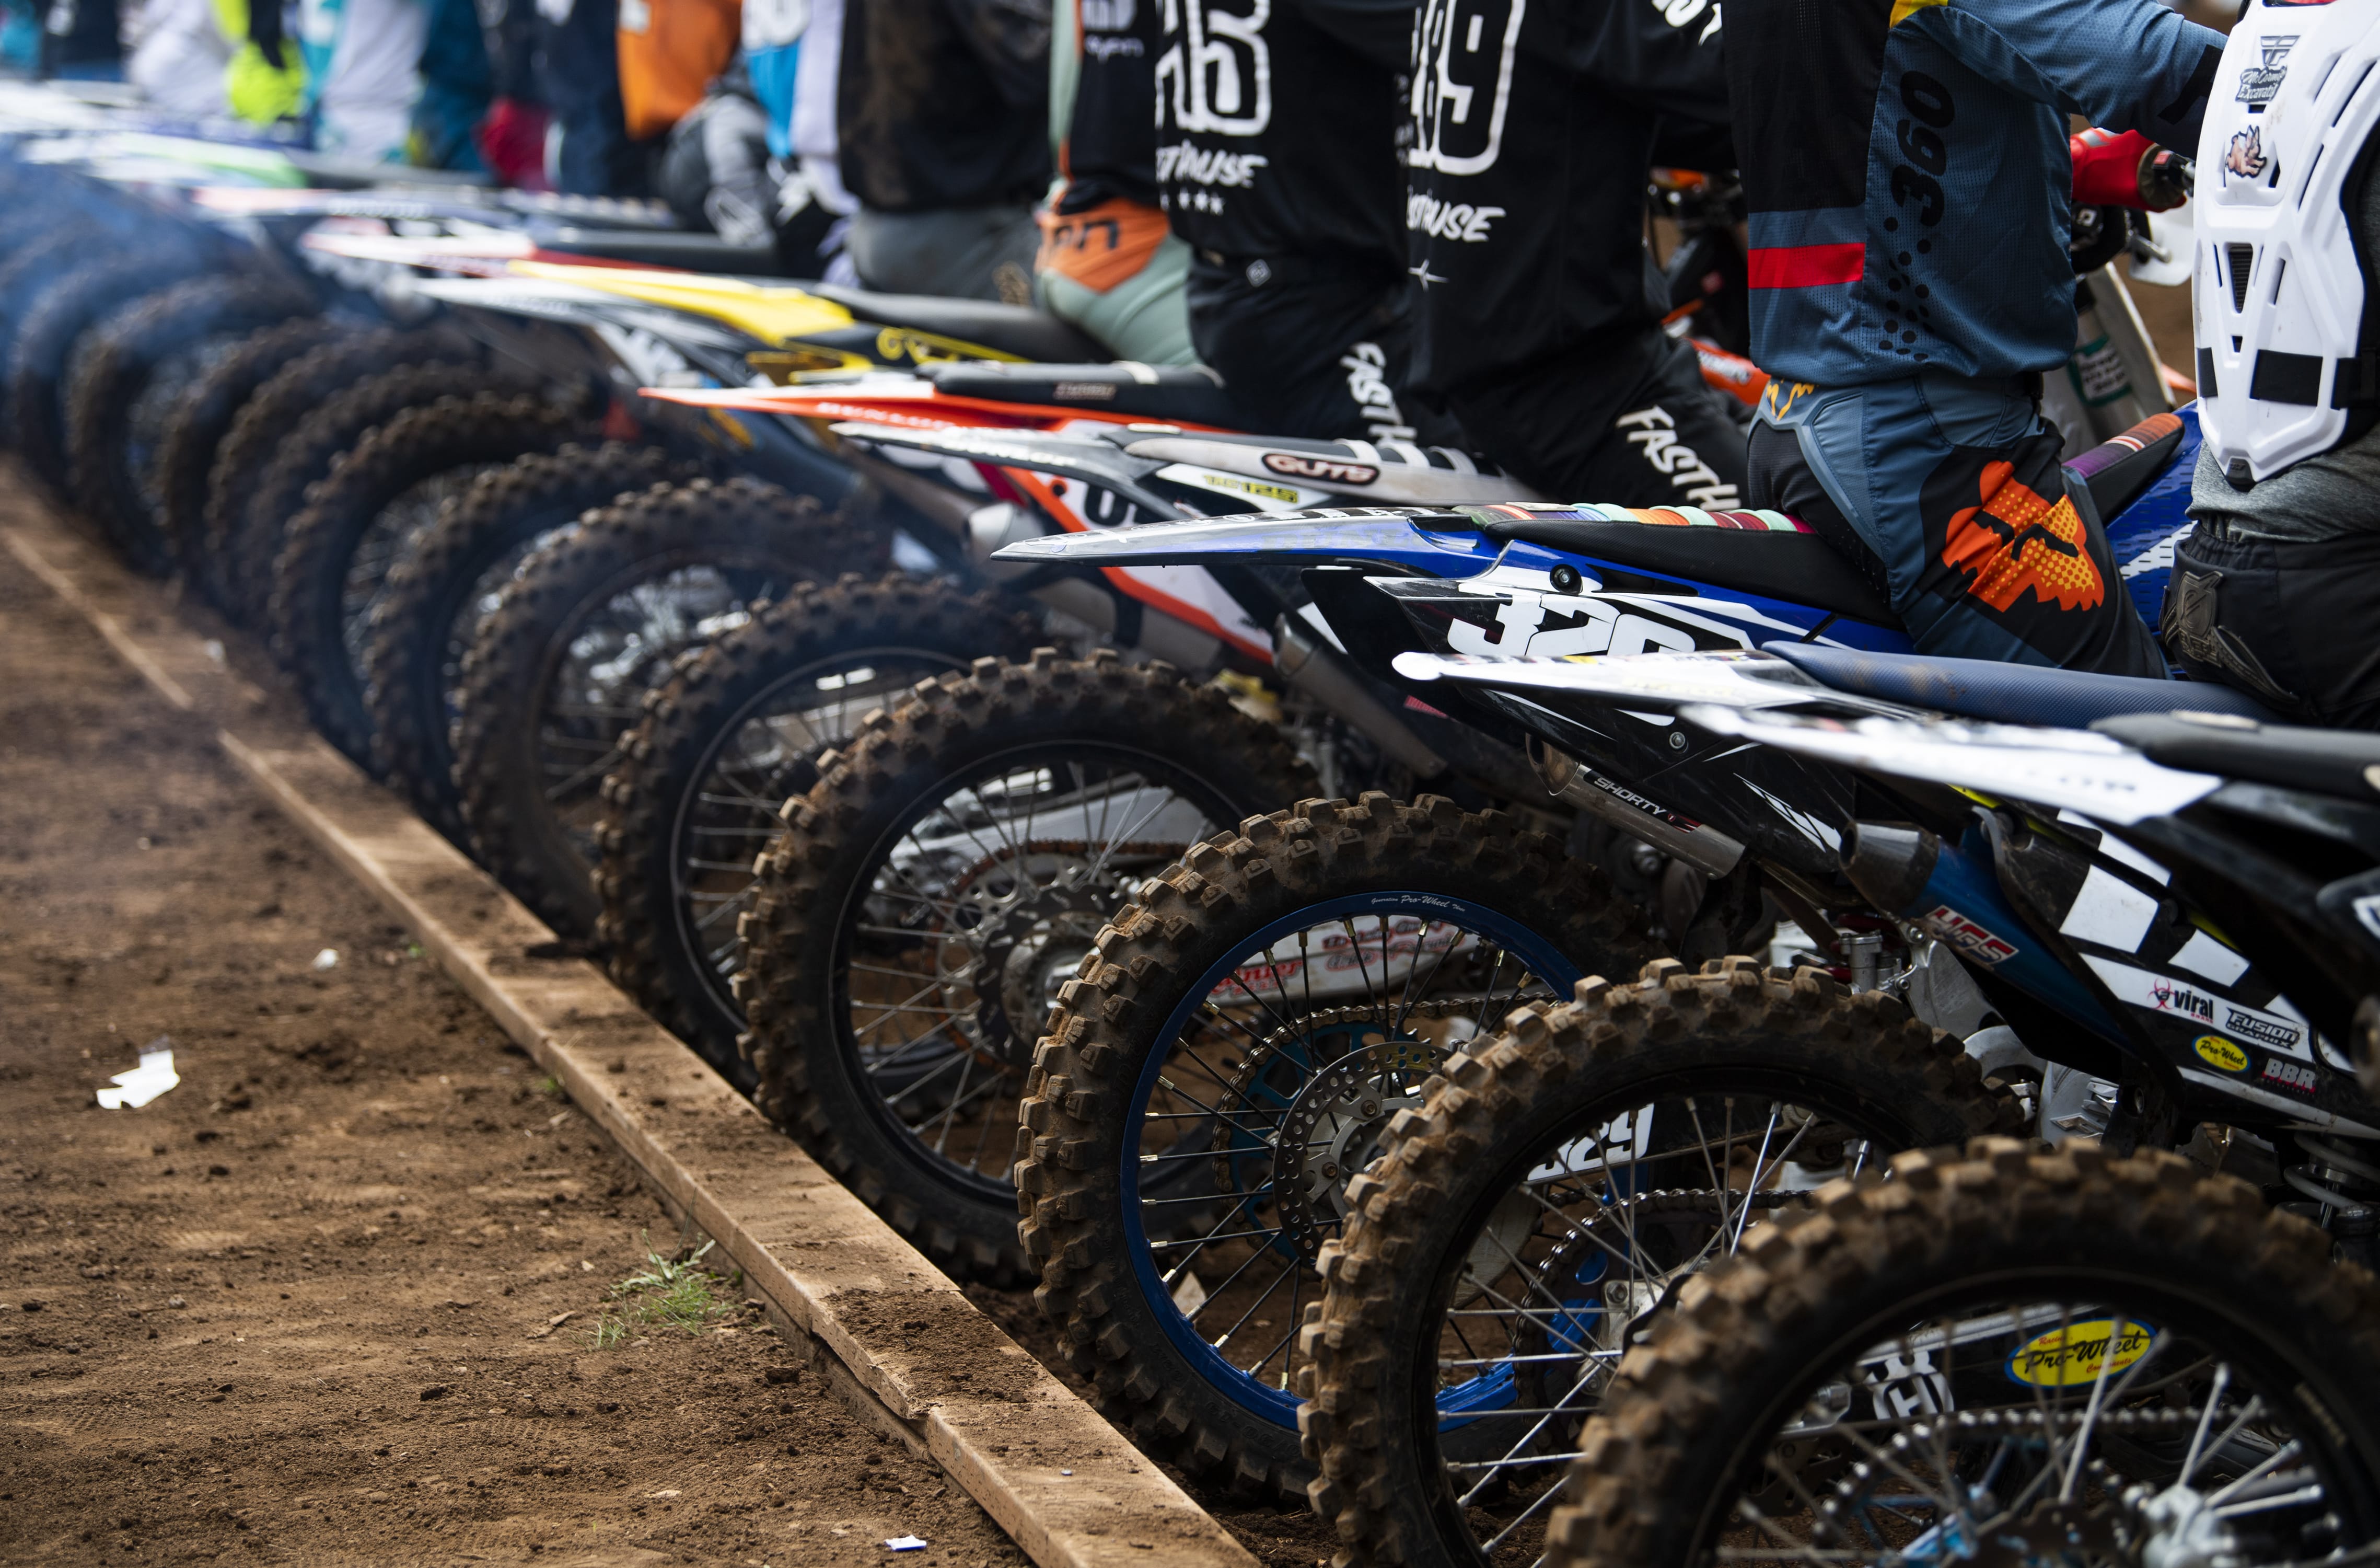 Riders line up for the 125 All Stare Race during the Washougal National Lucas Oil Pro Motocross at the Washougal MX Park on Saturday afternoon, July 27, 2019.